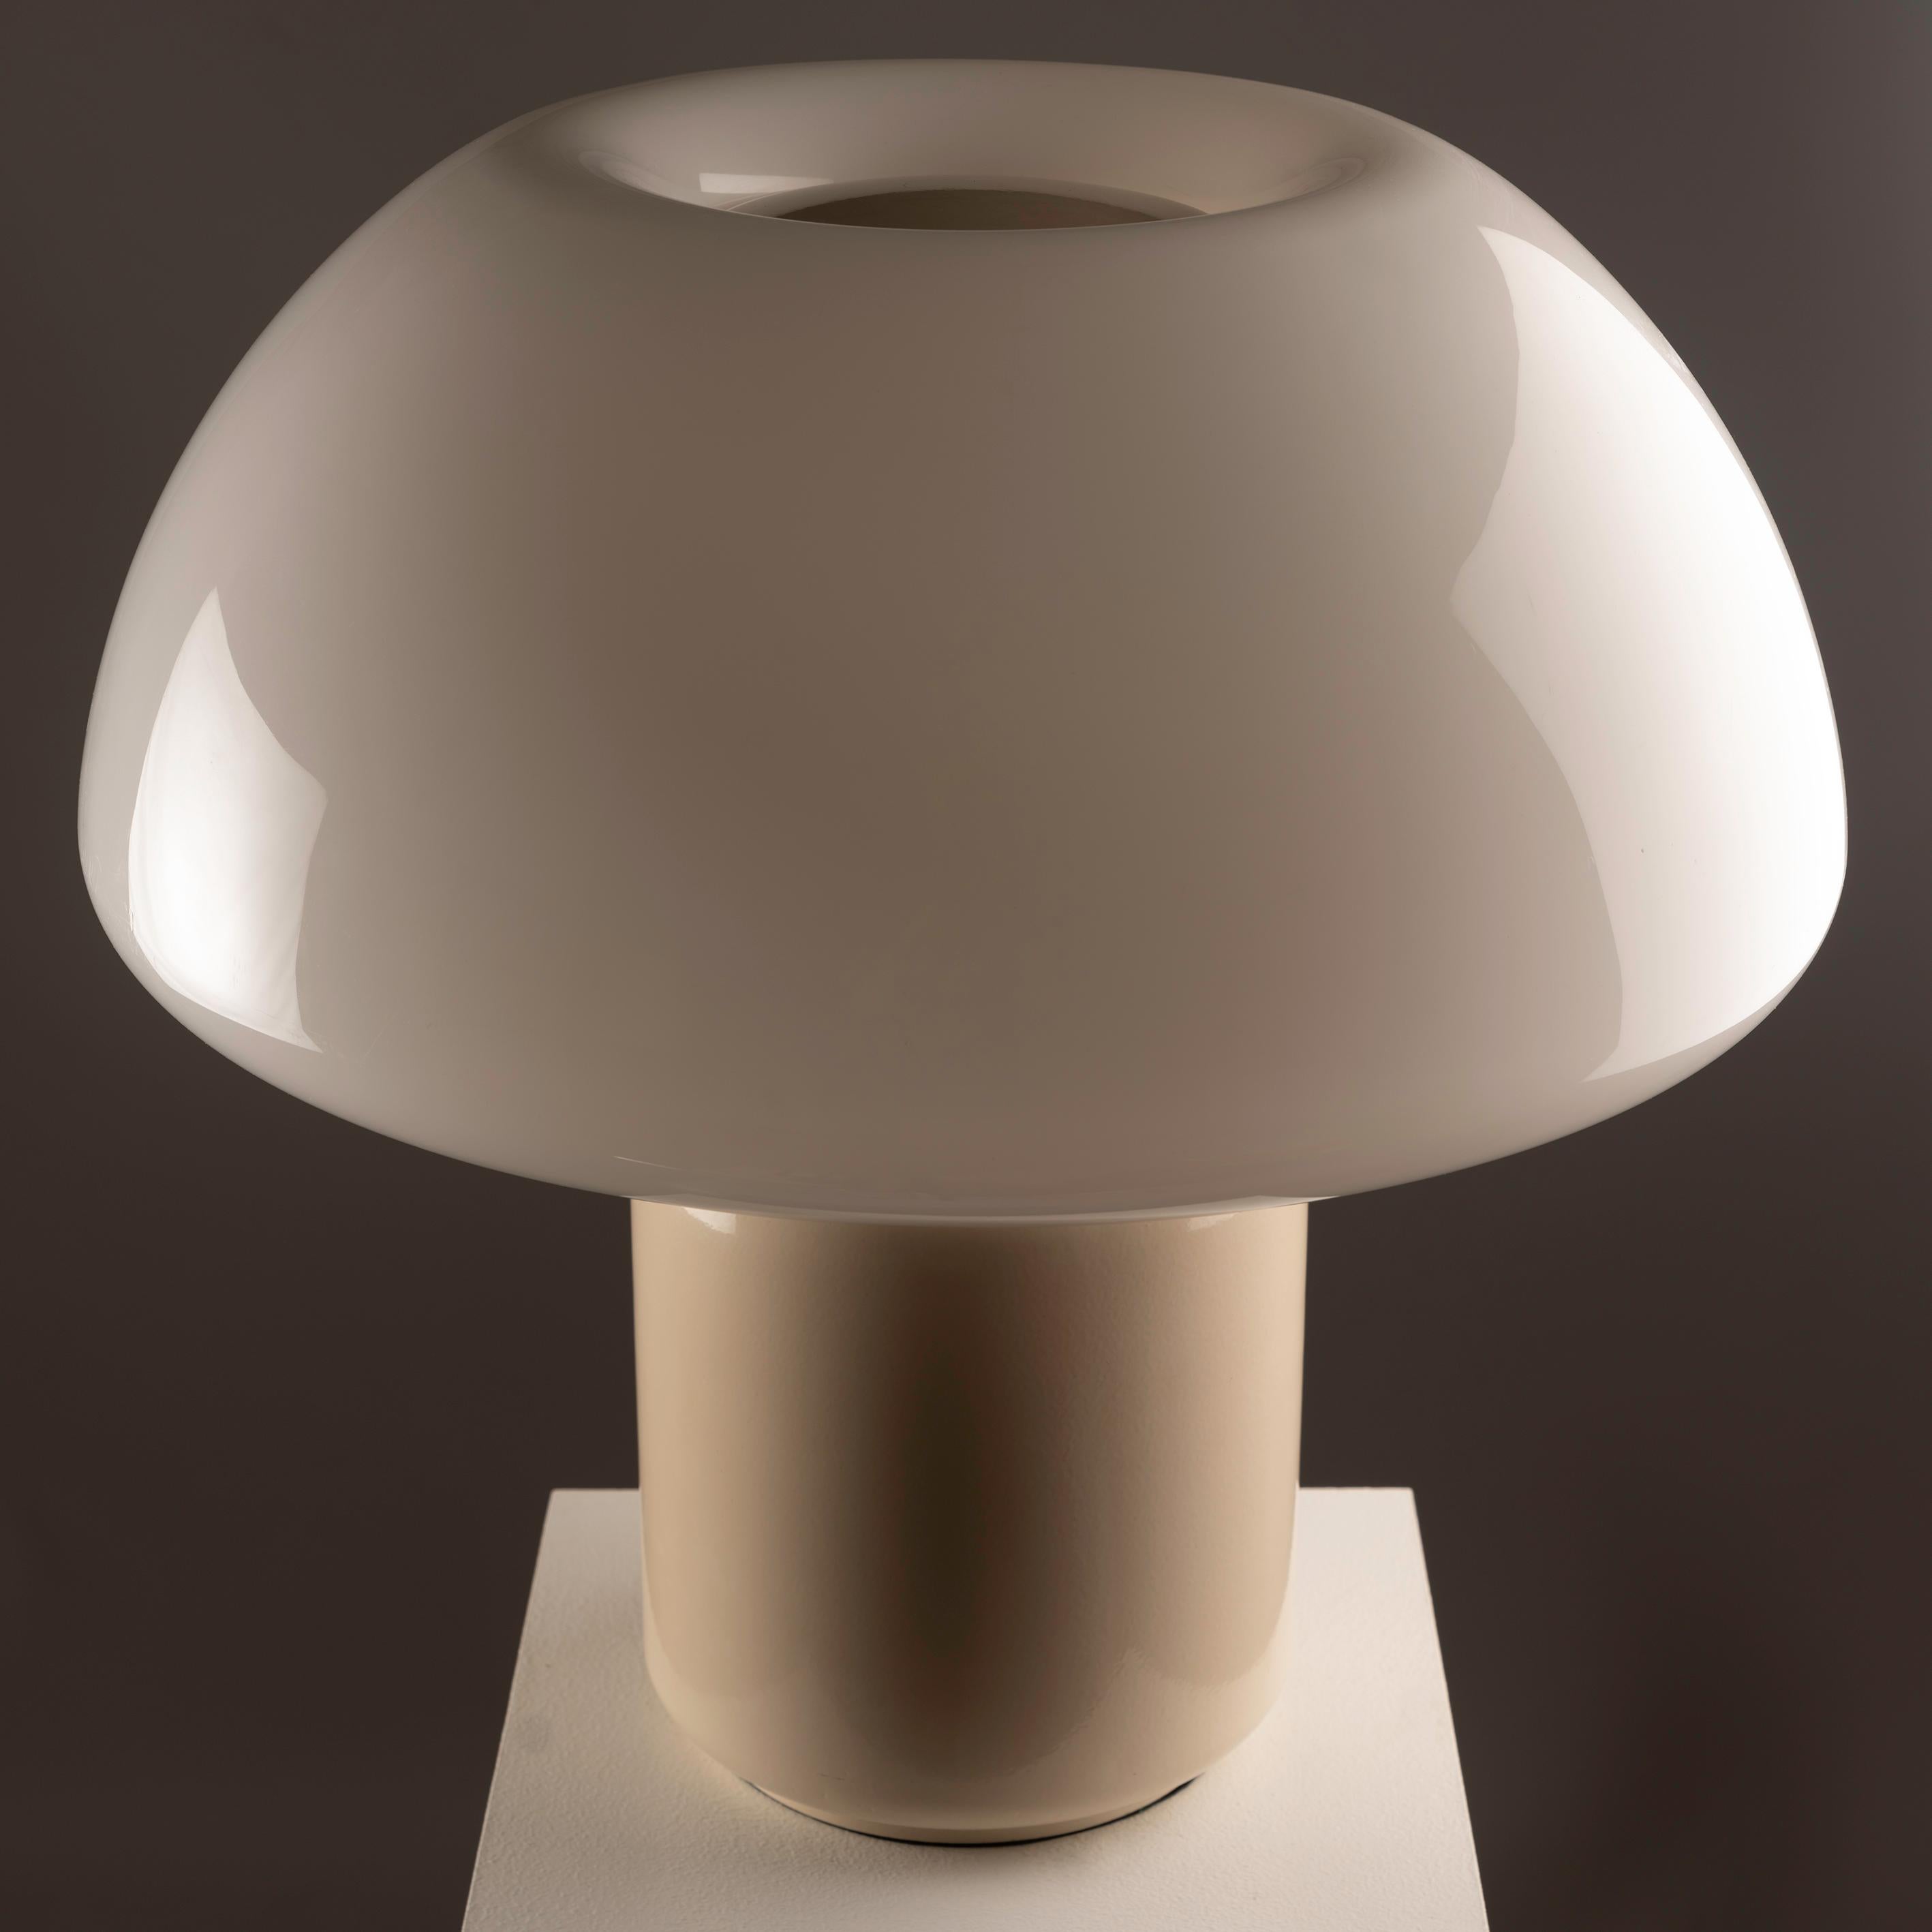 Aluminum A magnificent mushroom Lamp by Elio Martinelli for Martinelli Luce, Italy 1970s